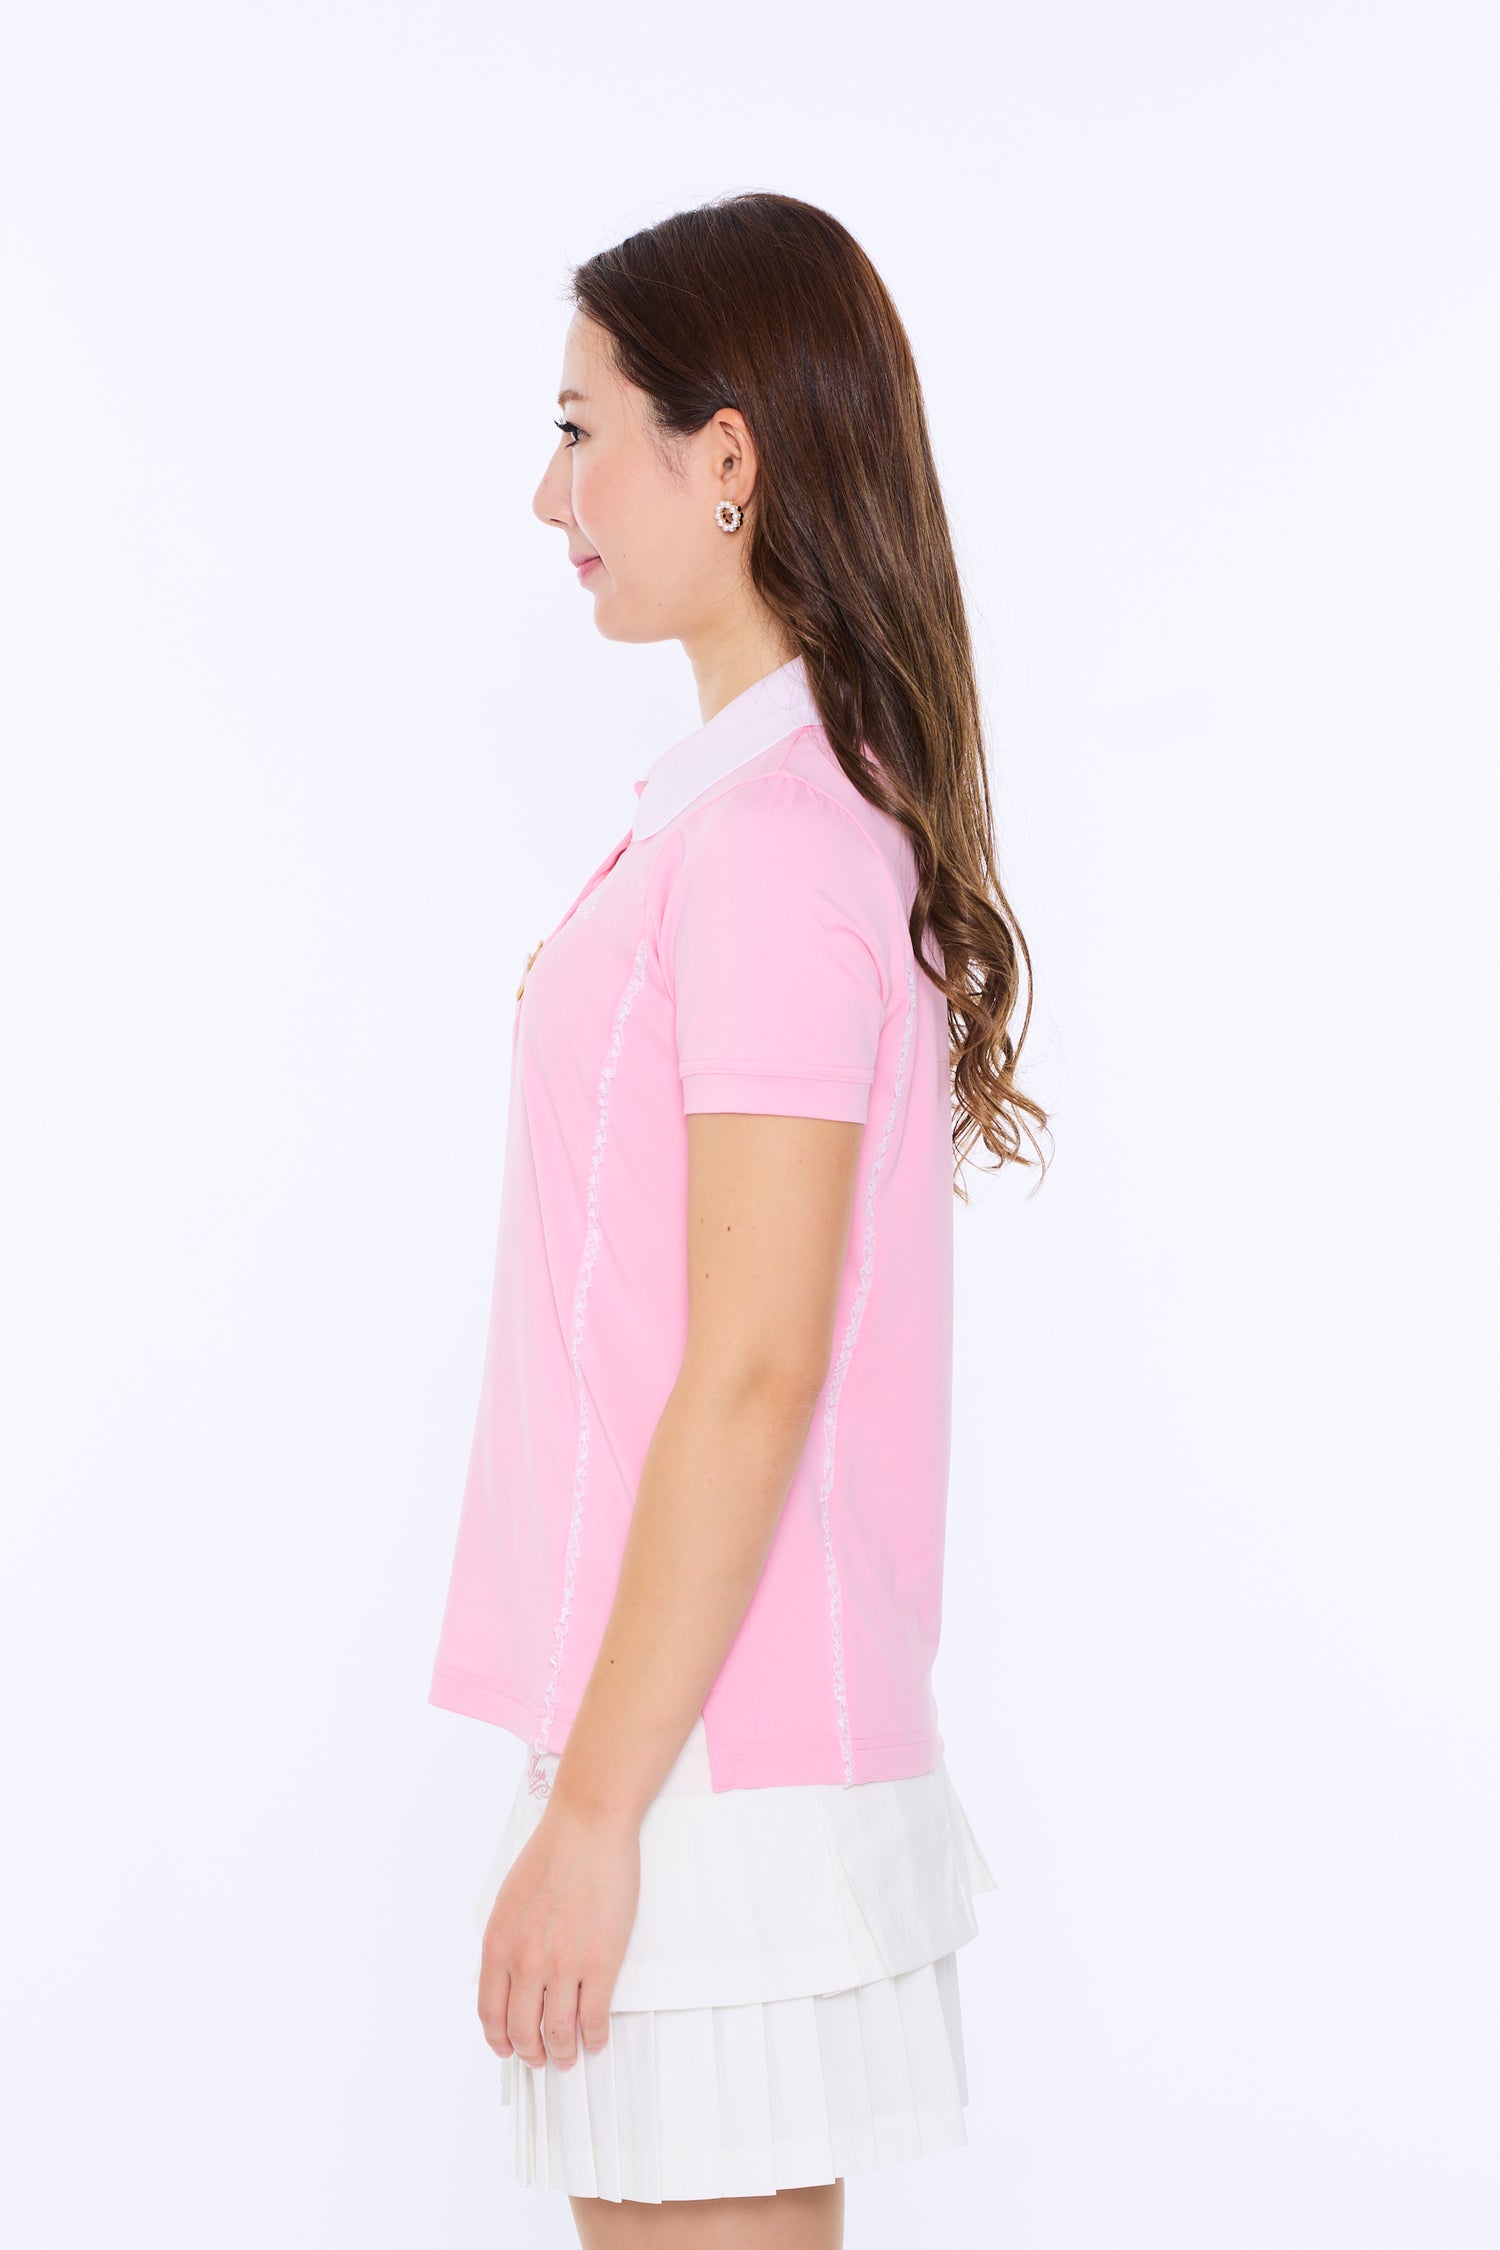 Short sleeve cleric polo with trim tape (701H2006)